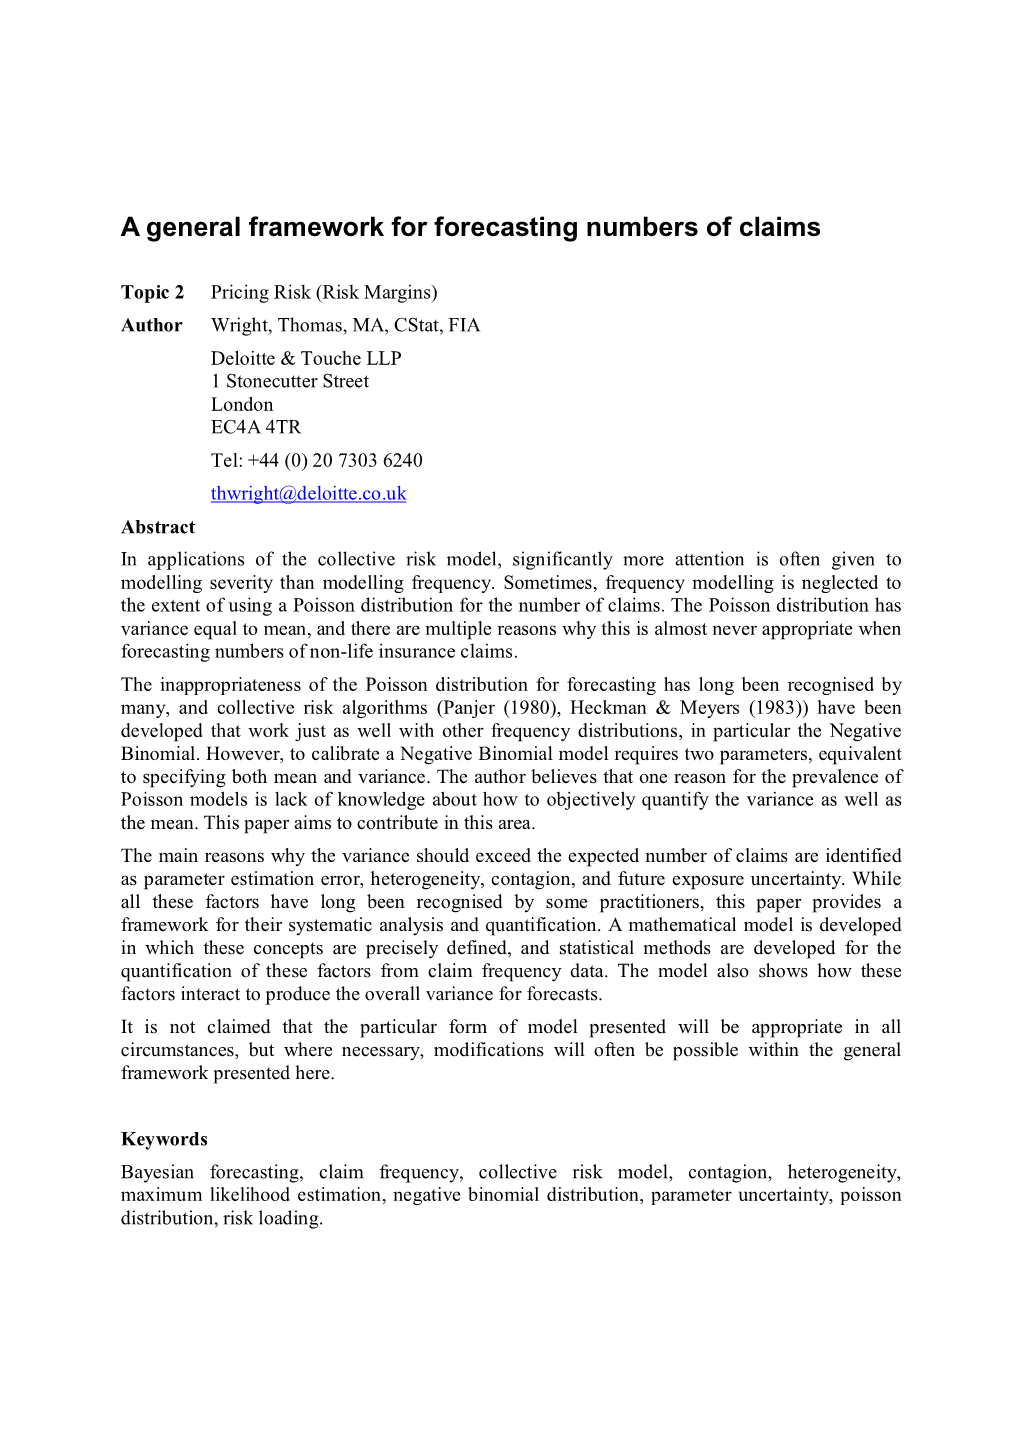 A General Framework for Forecasting Numbers of Claims